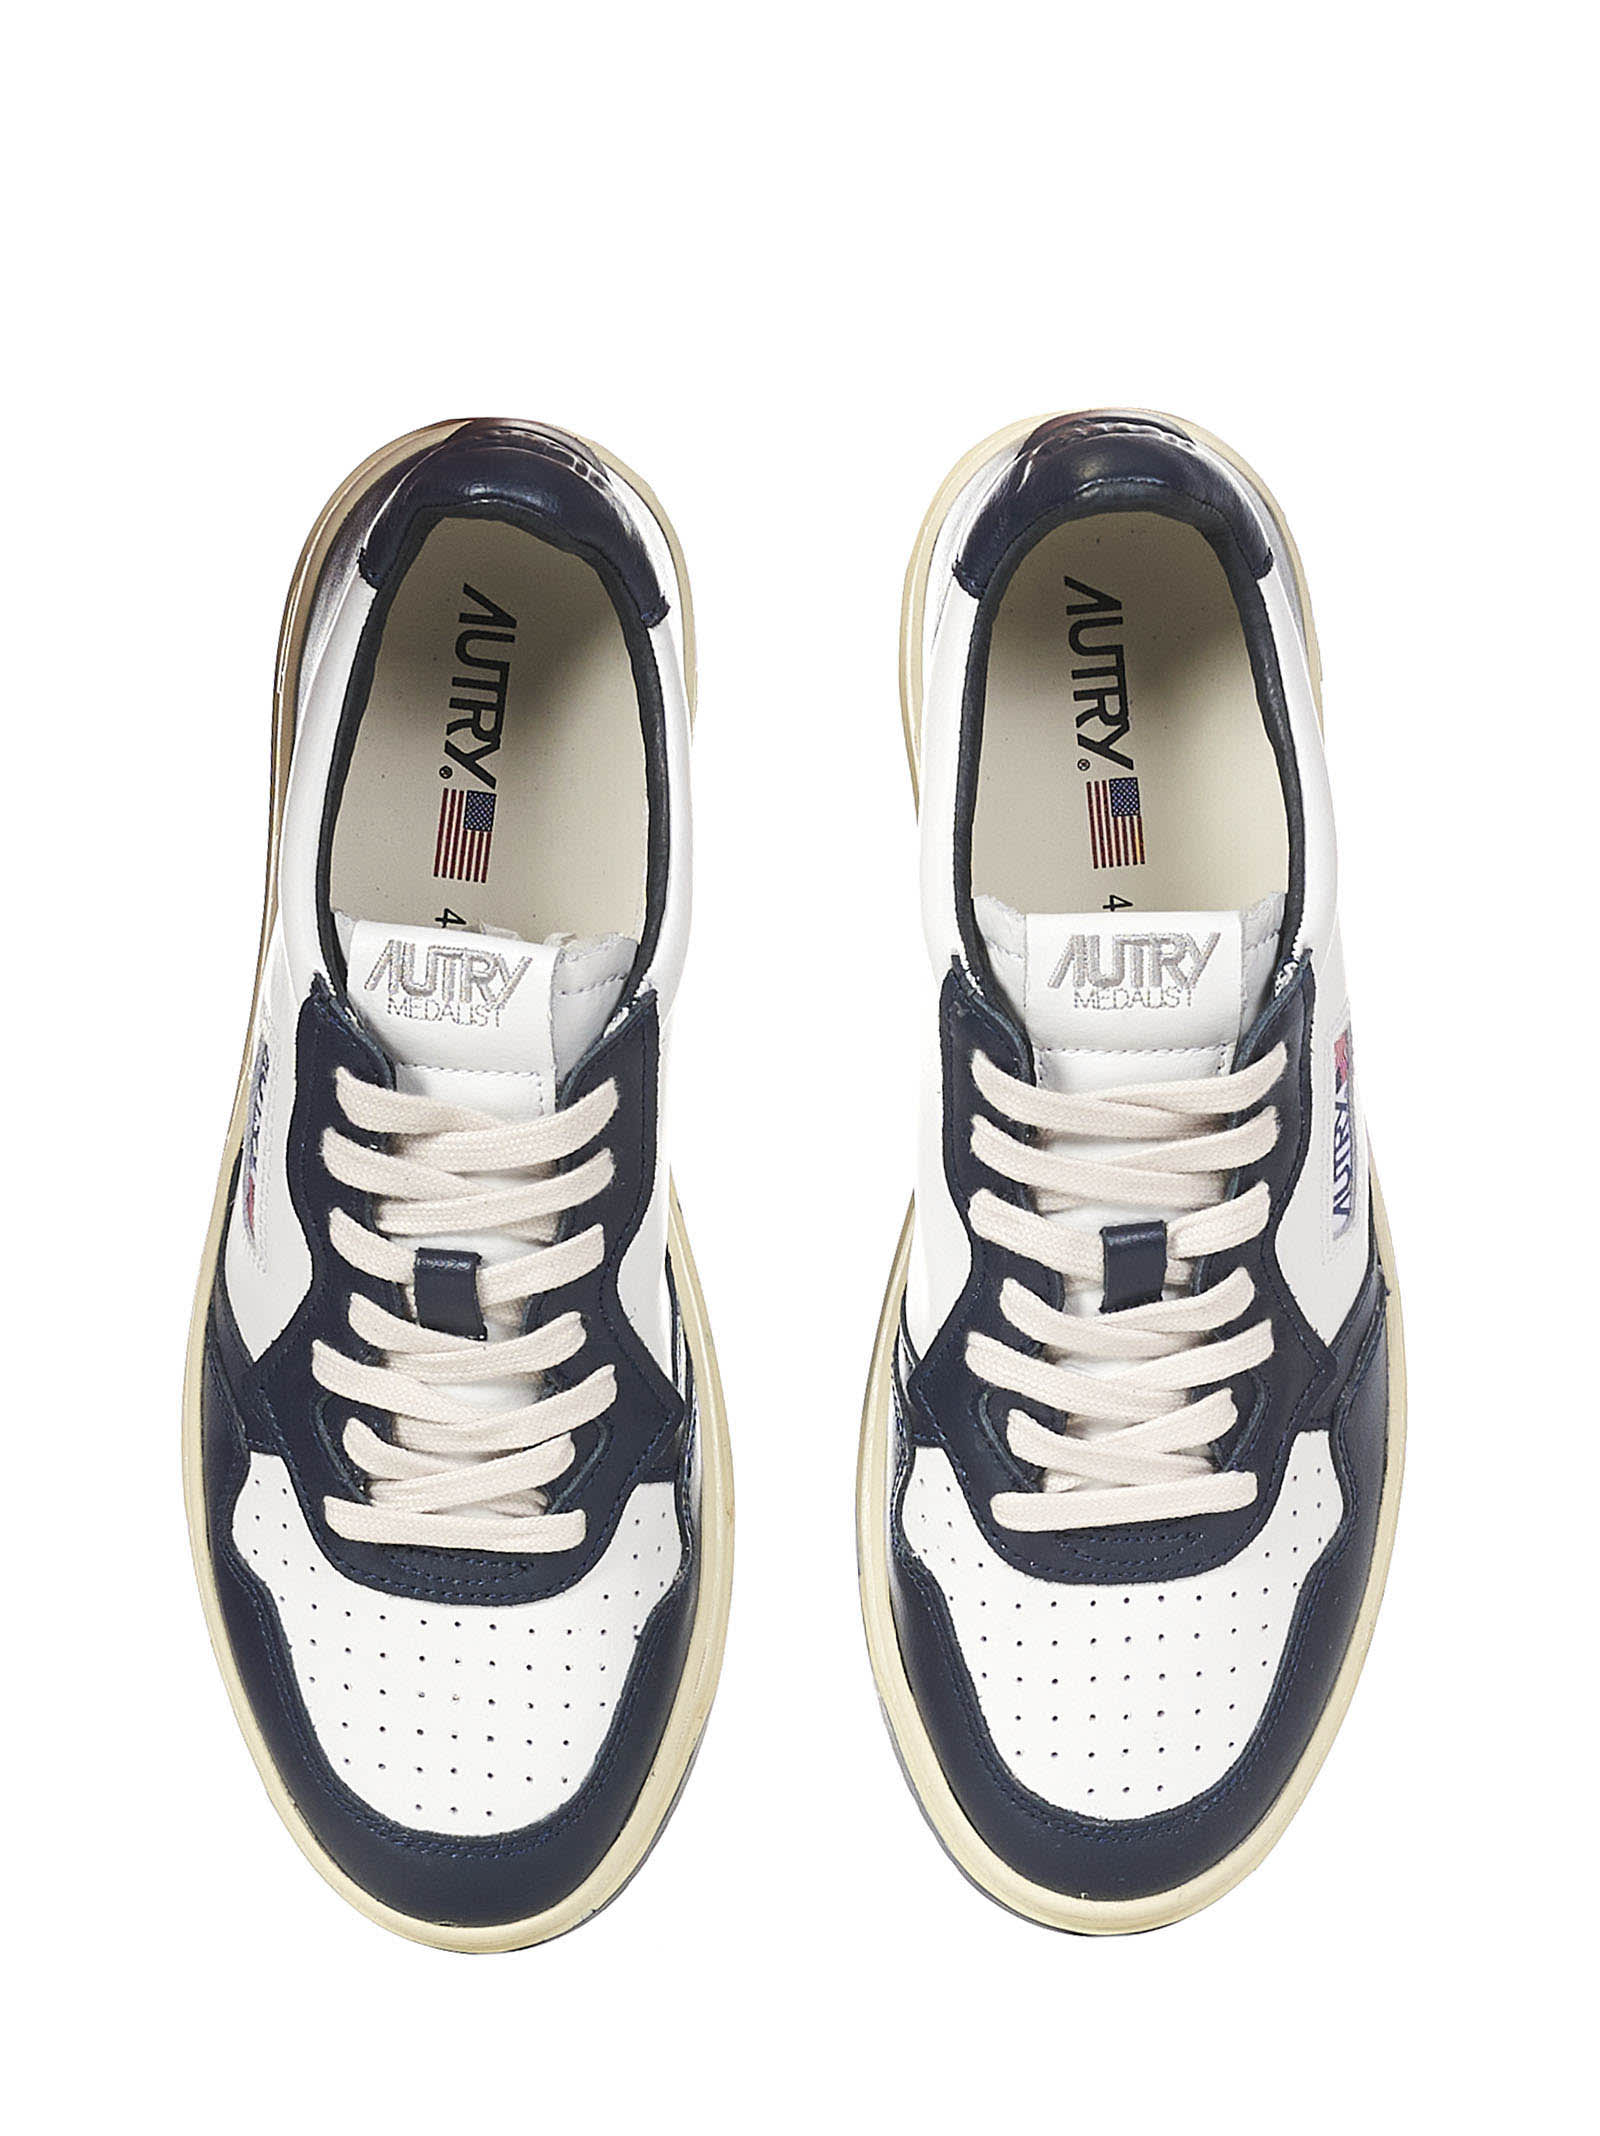 Shop Autry Action Medalist 1 Low Sneakers In Blue